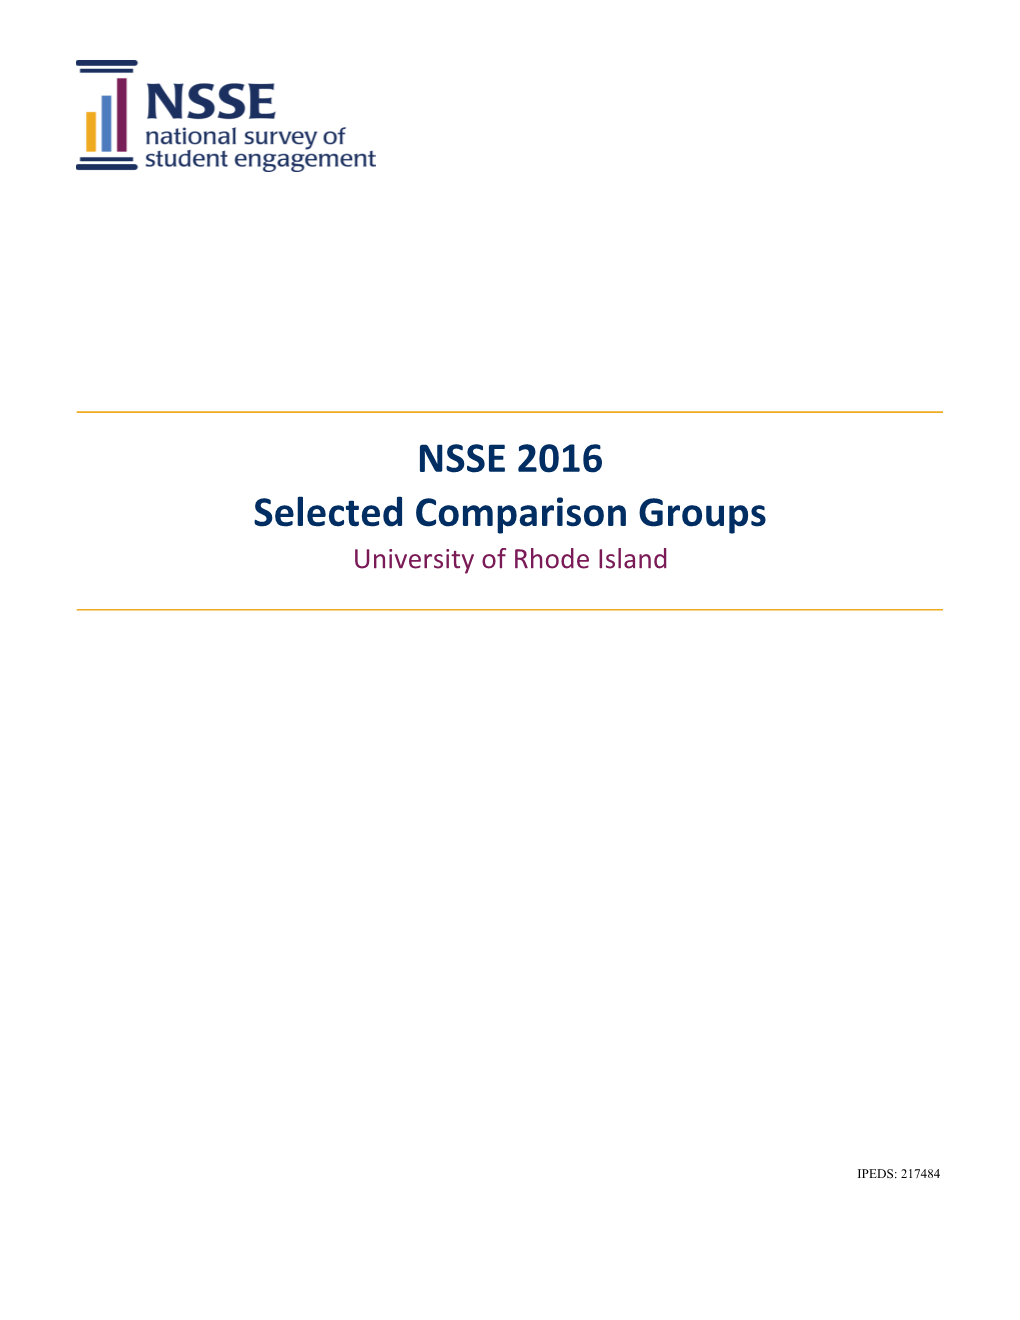 NSSE16 Selected Comparison Groups